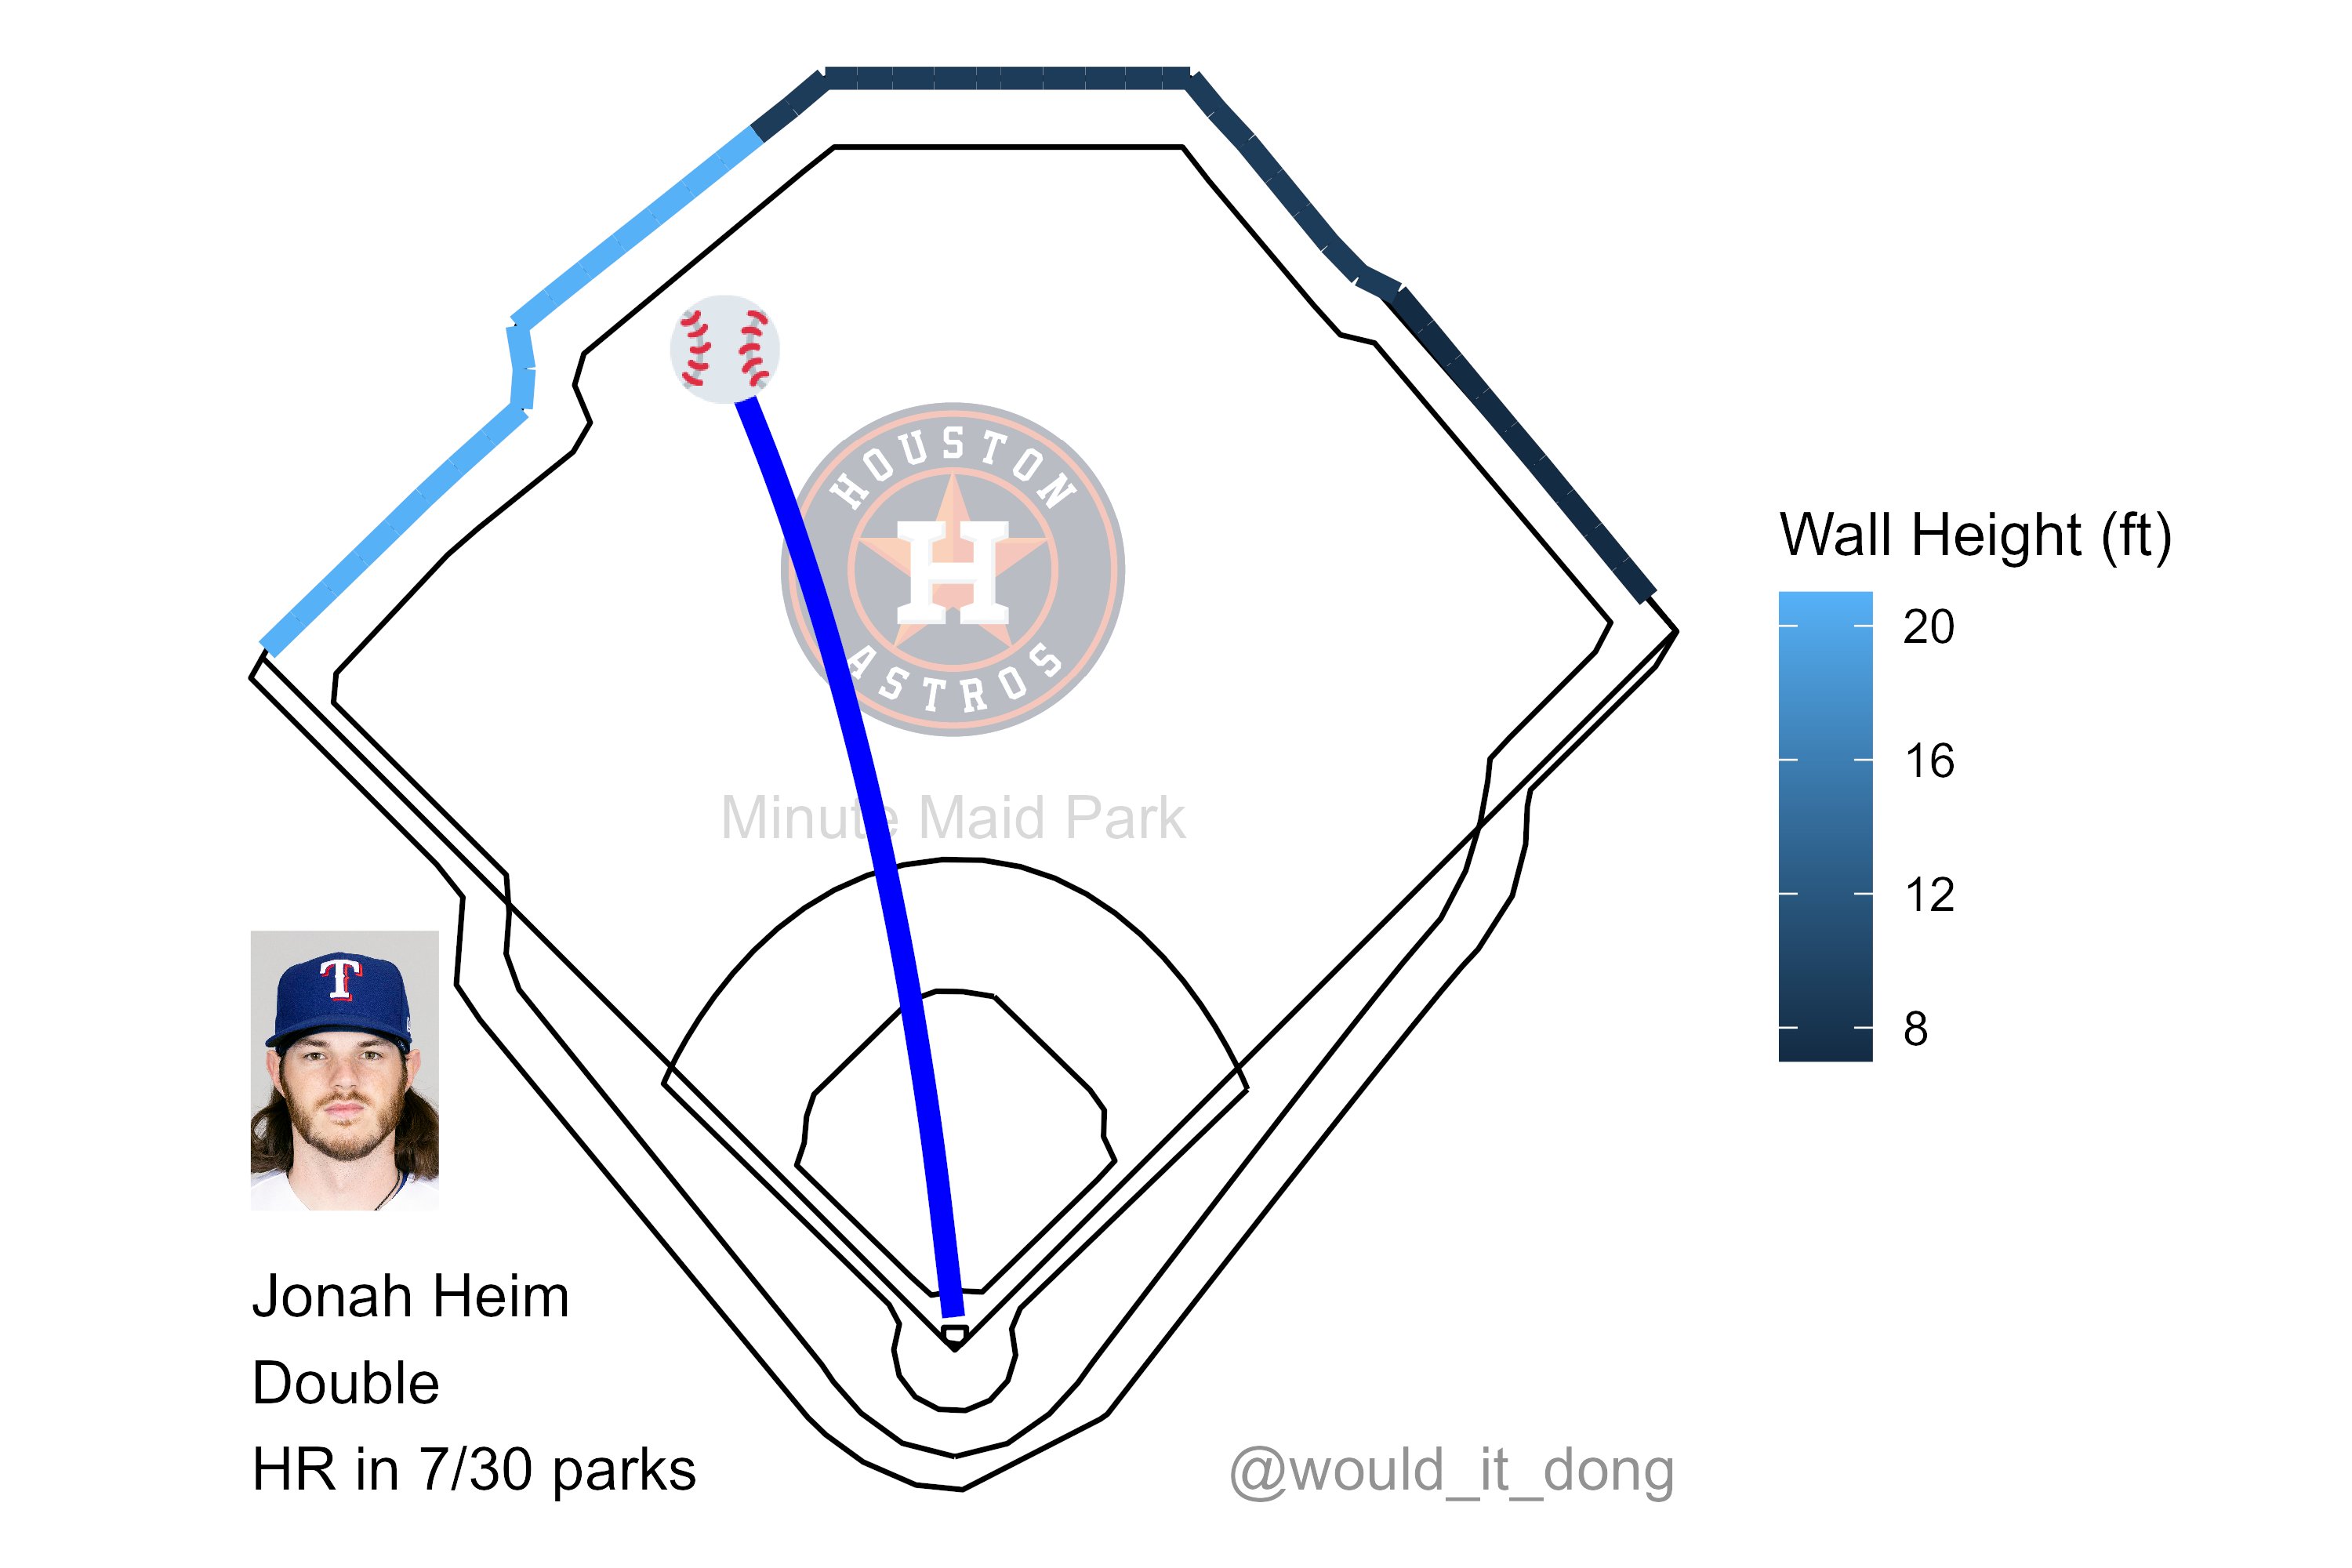 Would it dong? on X: Jonah Heim vs Framber Valdez #StraightUpTX Double (2)  🏃💨 Exit velo: 103.1 mph Launch angle: 23 deg Proj. distance: 400 ft This  would have been a home